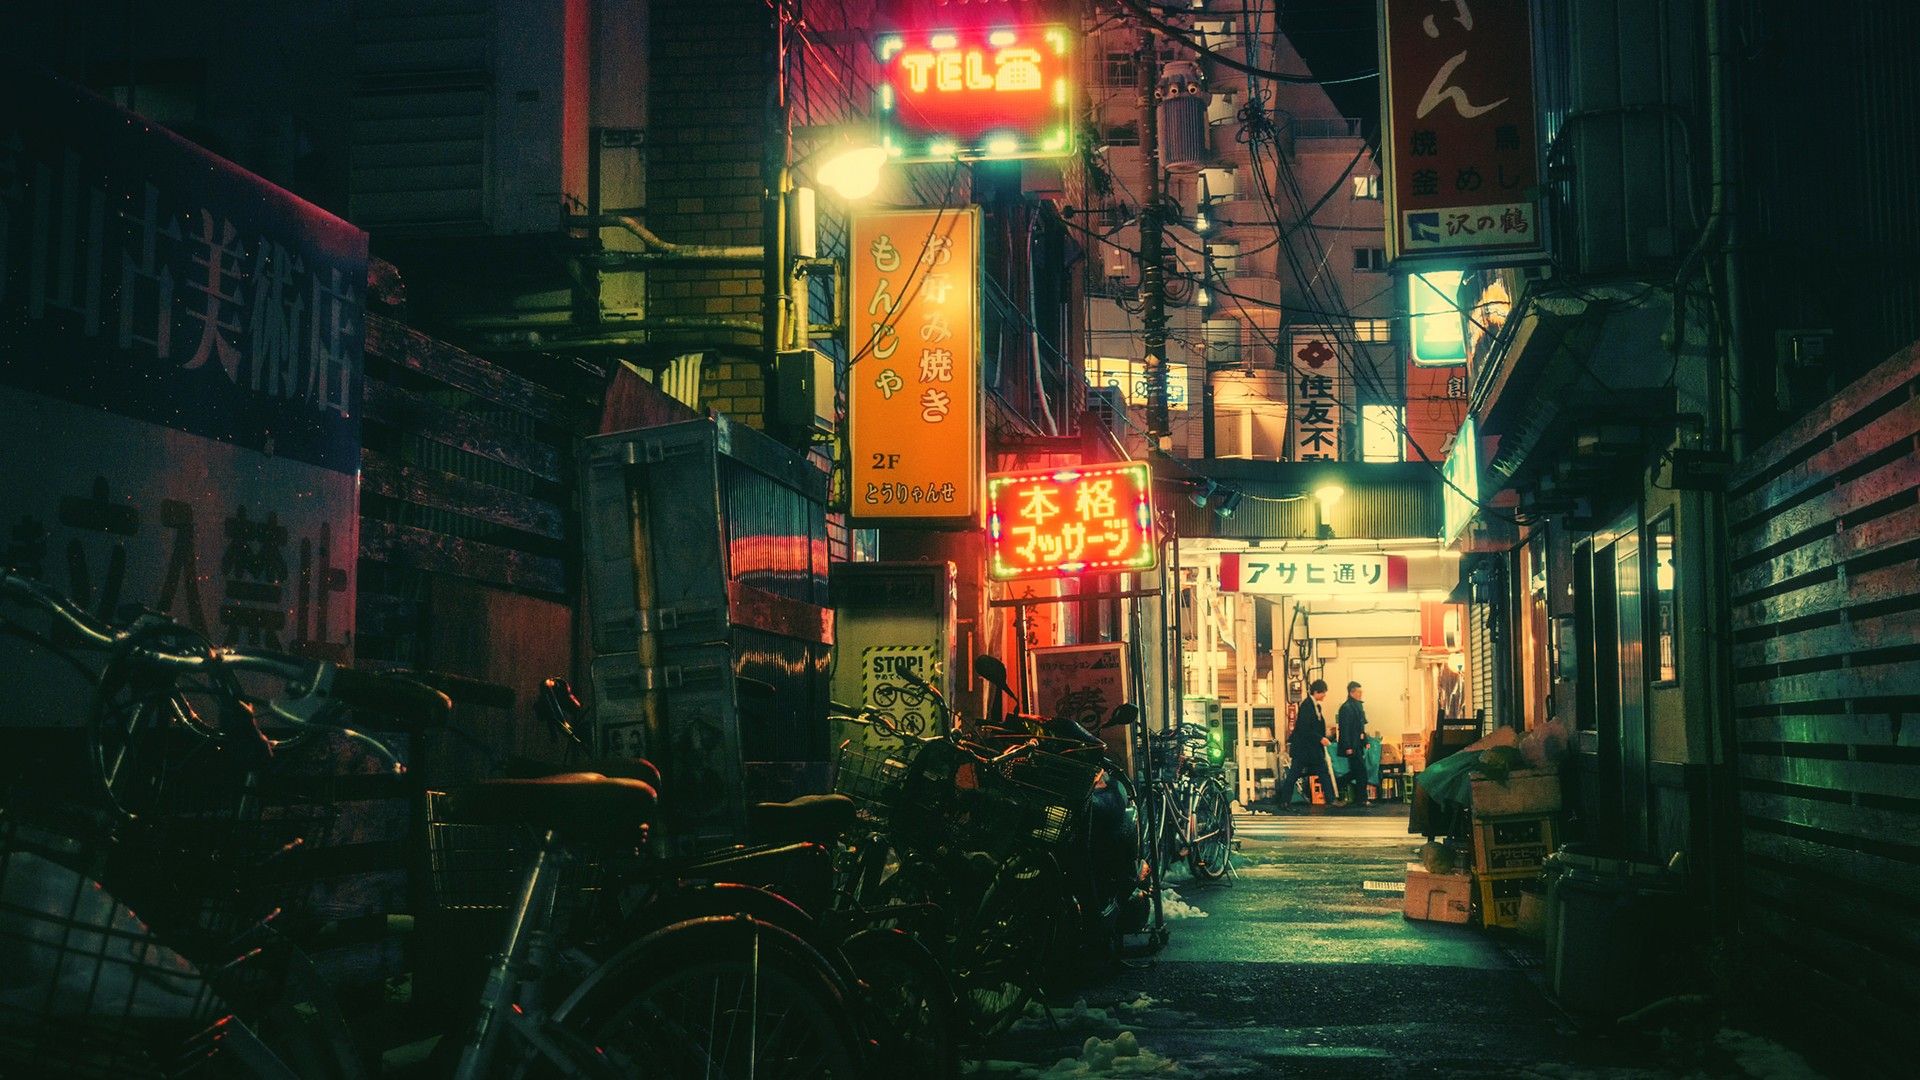 Japanese, Tokyo, Neon light, Bicycle Wallpaper HD / Desktop and Mobile Background